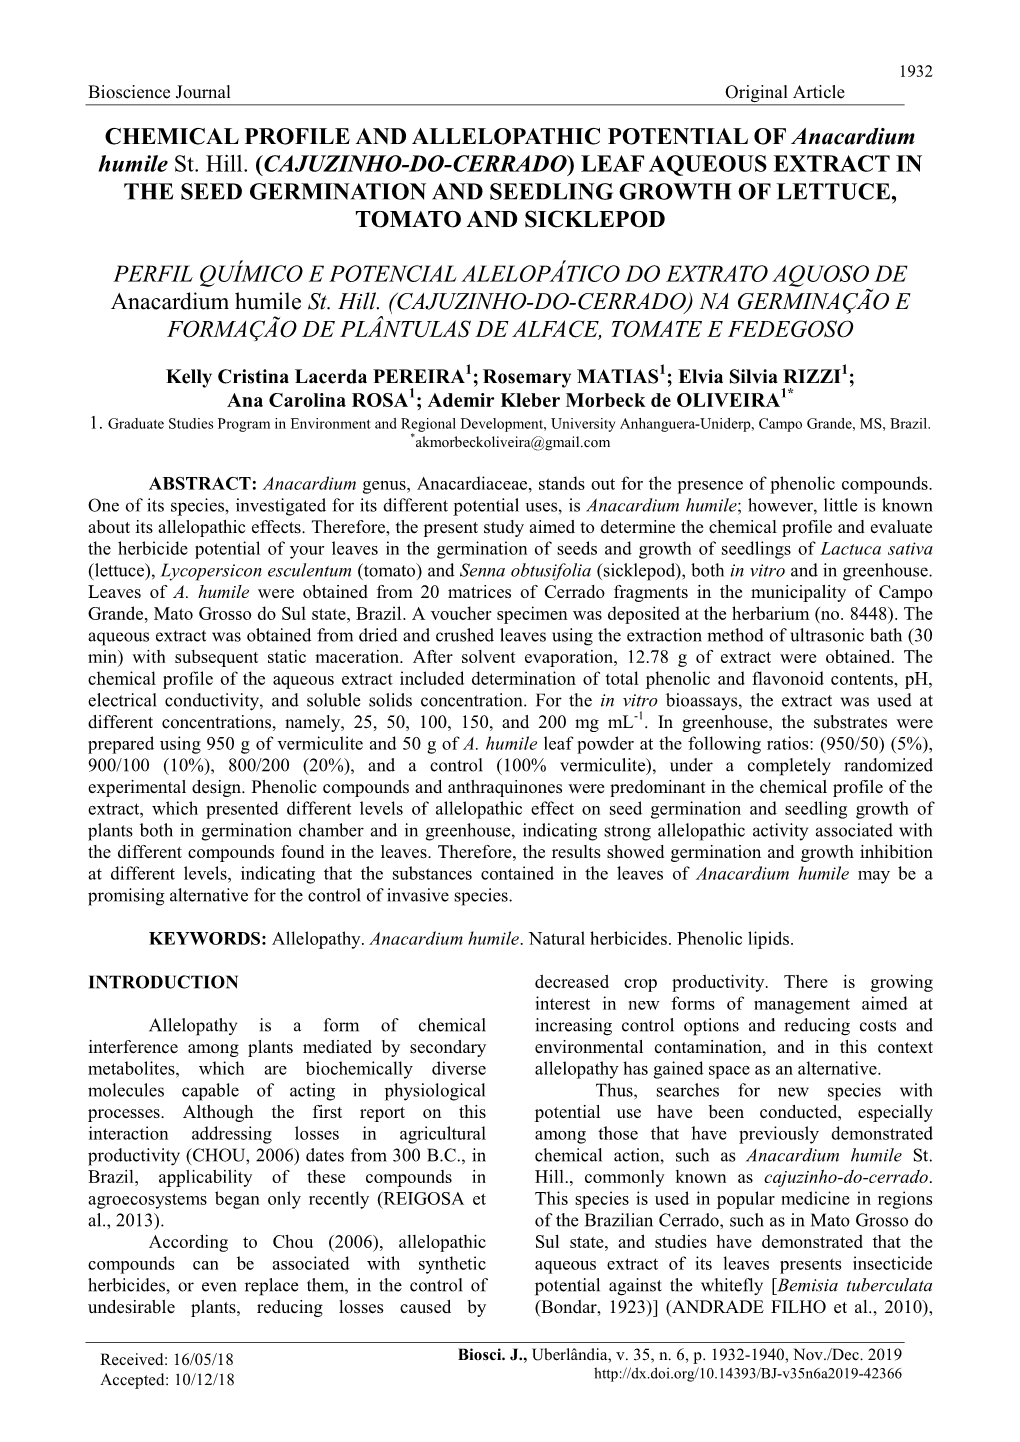 Cajuzinho-Do-Cerrado) Leaf Aqueous Extract in the Seed Germination and Seedling Growth of Lettuce, Tomato and Sicklepod